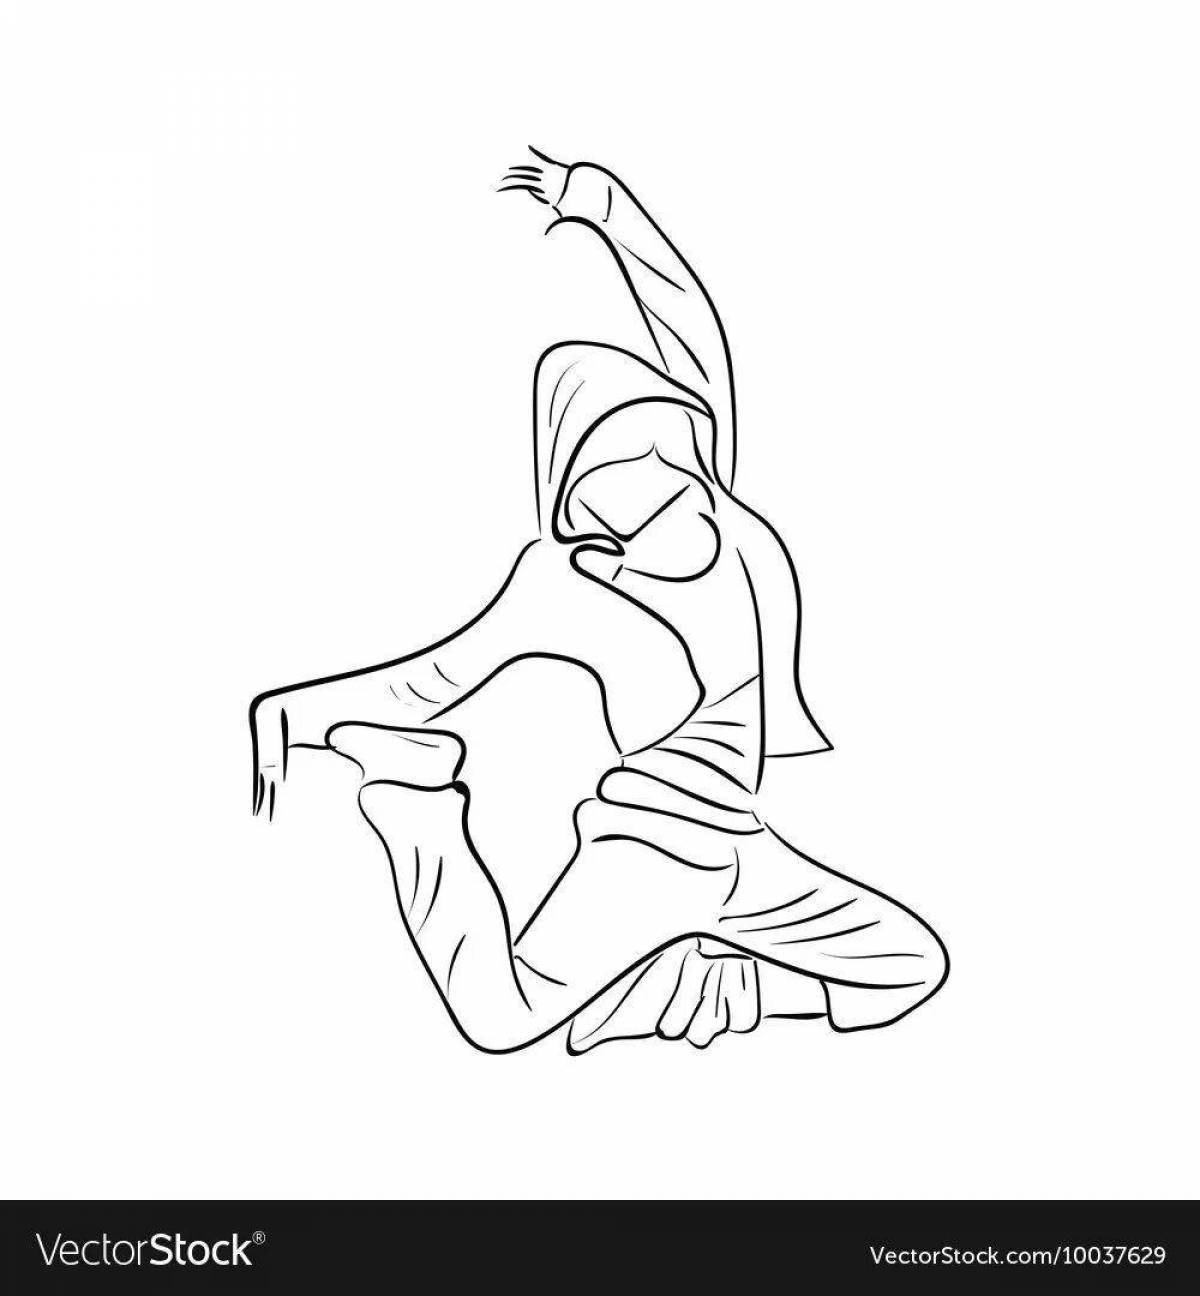 Coloring page clever dancer